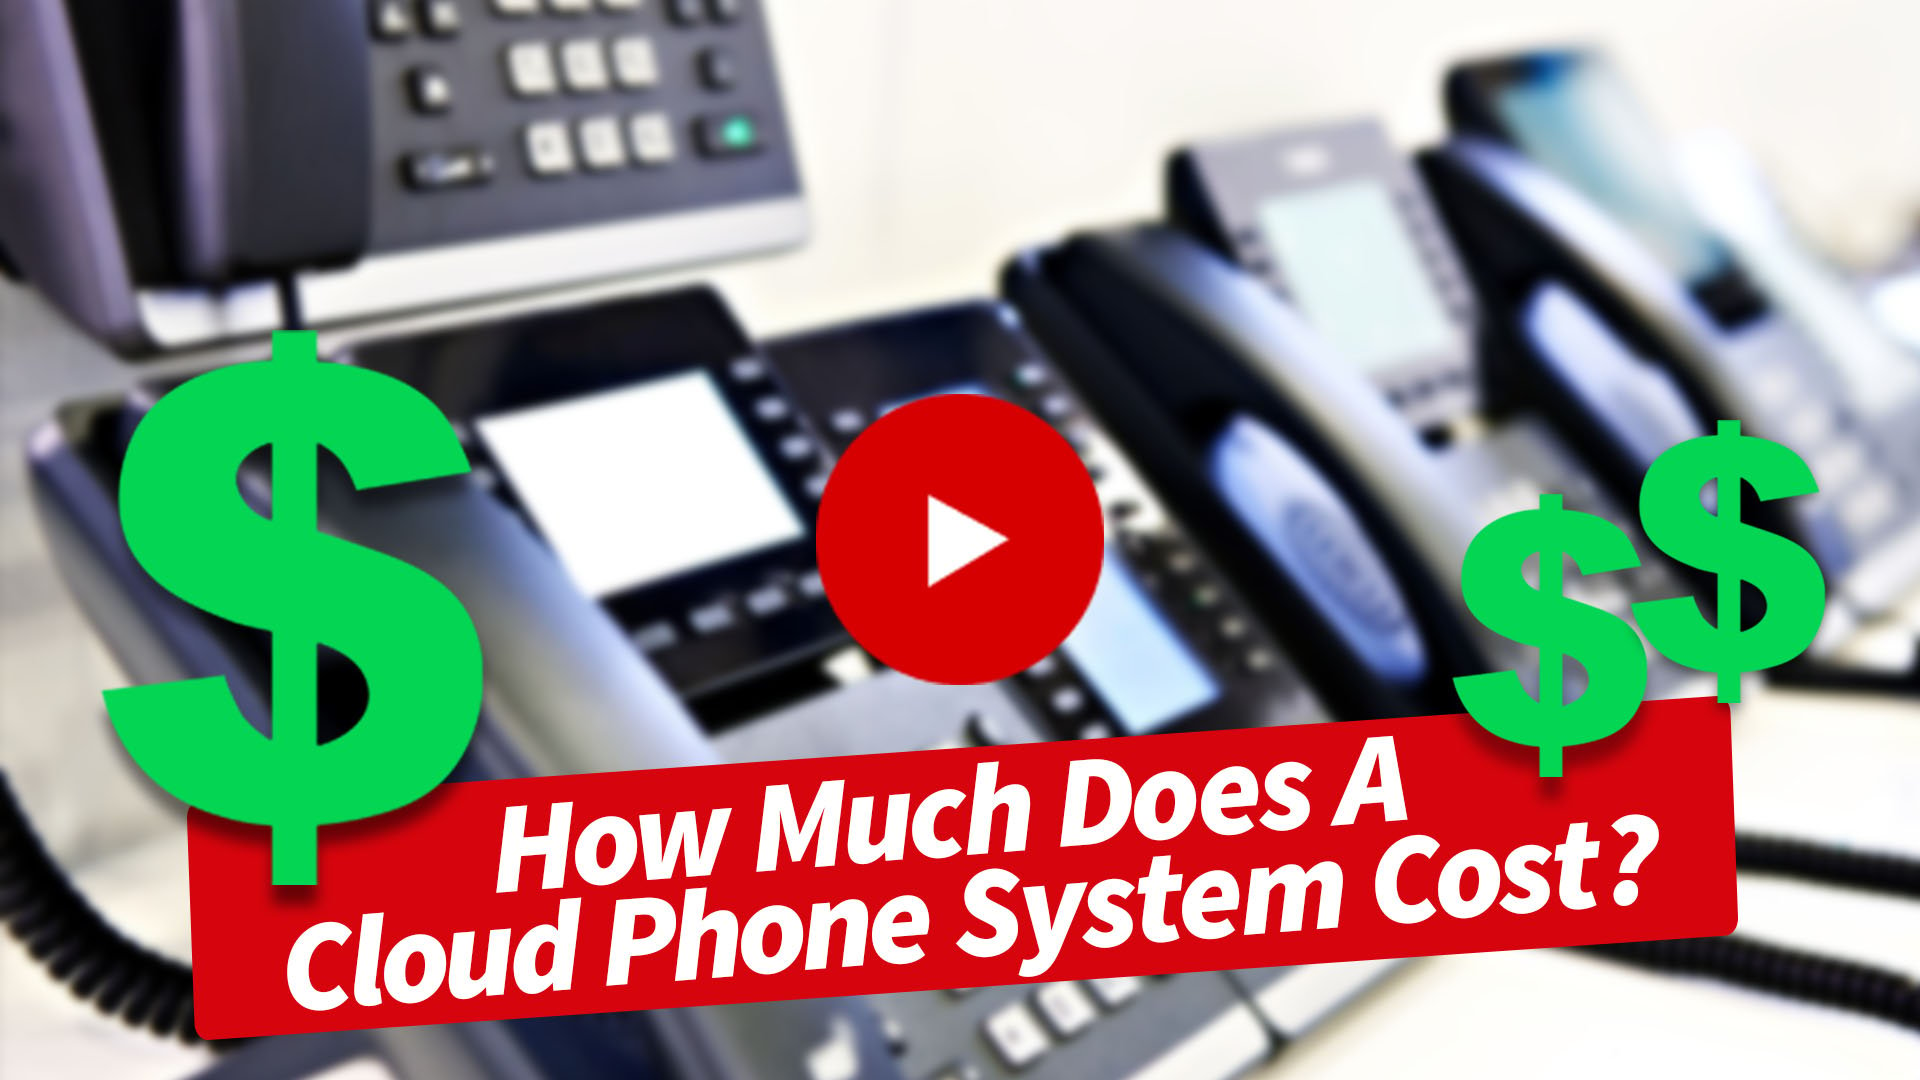 How Much Does A Cloud Phone System Cost With AIS?